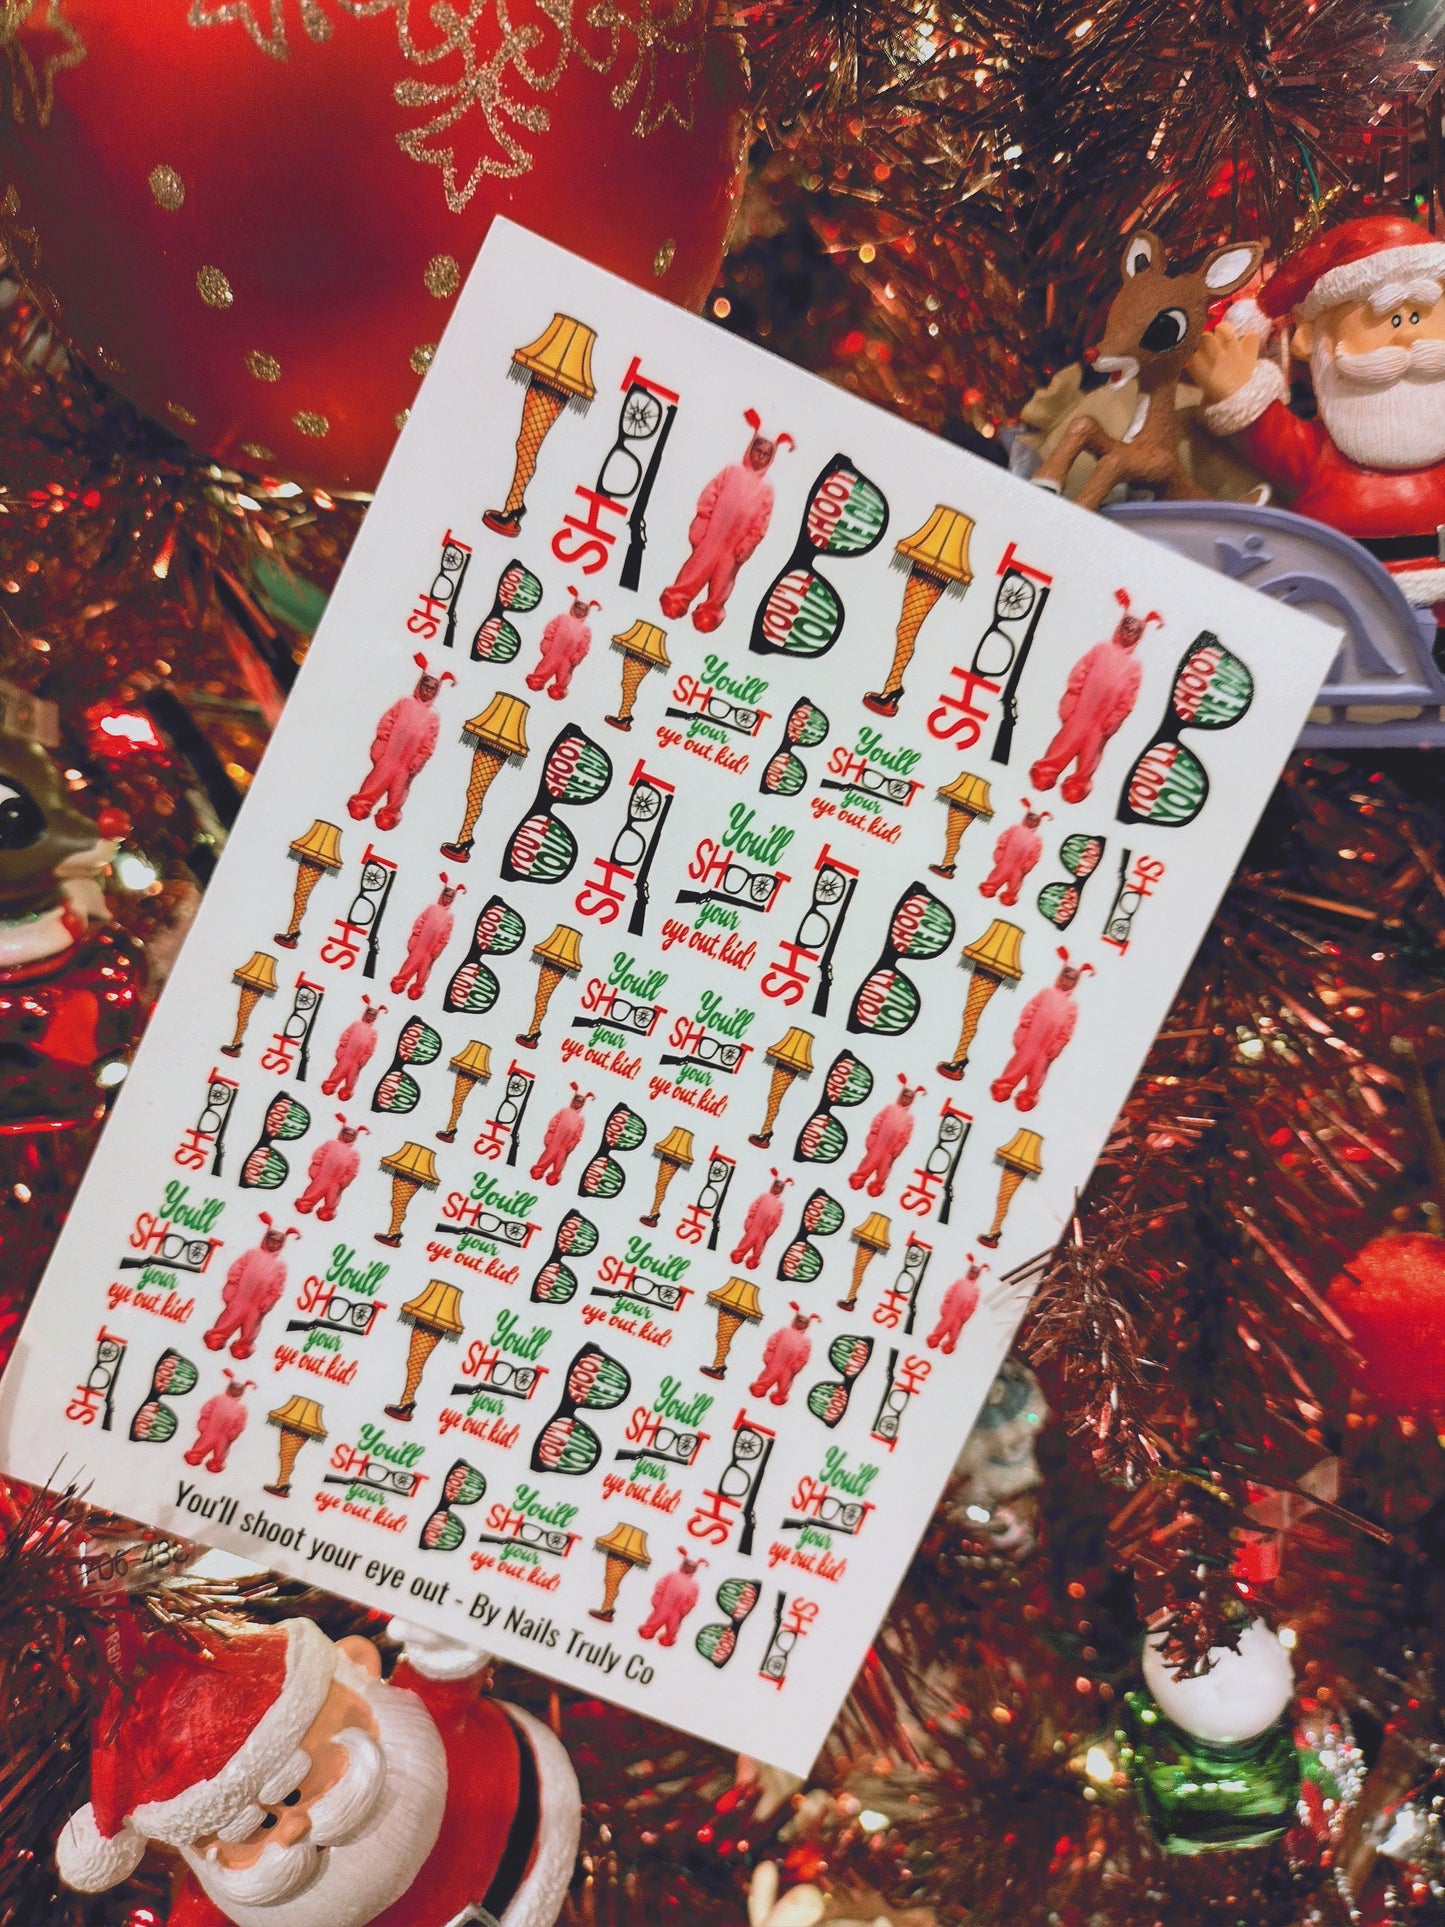 Christmas Nail Art Decals -  You'll shoot your eye out!